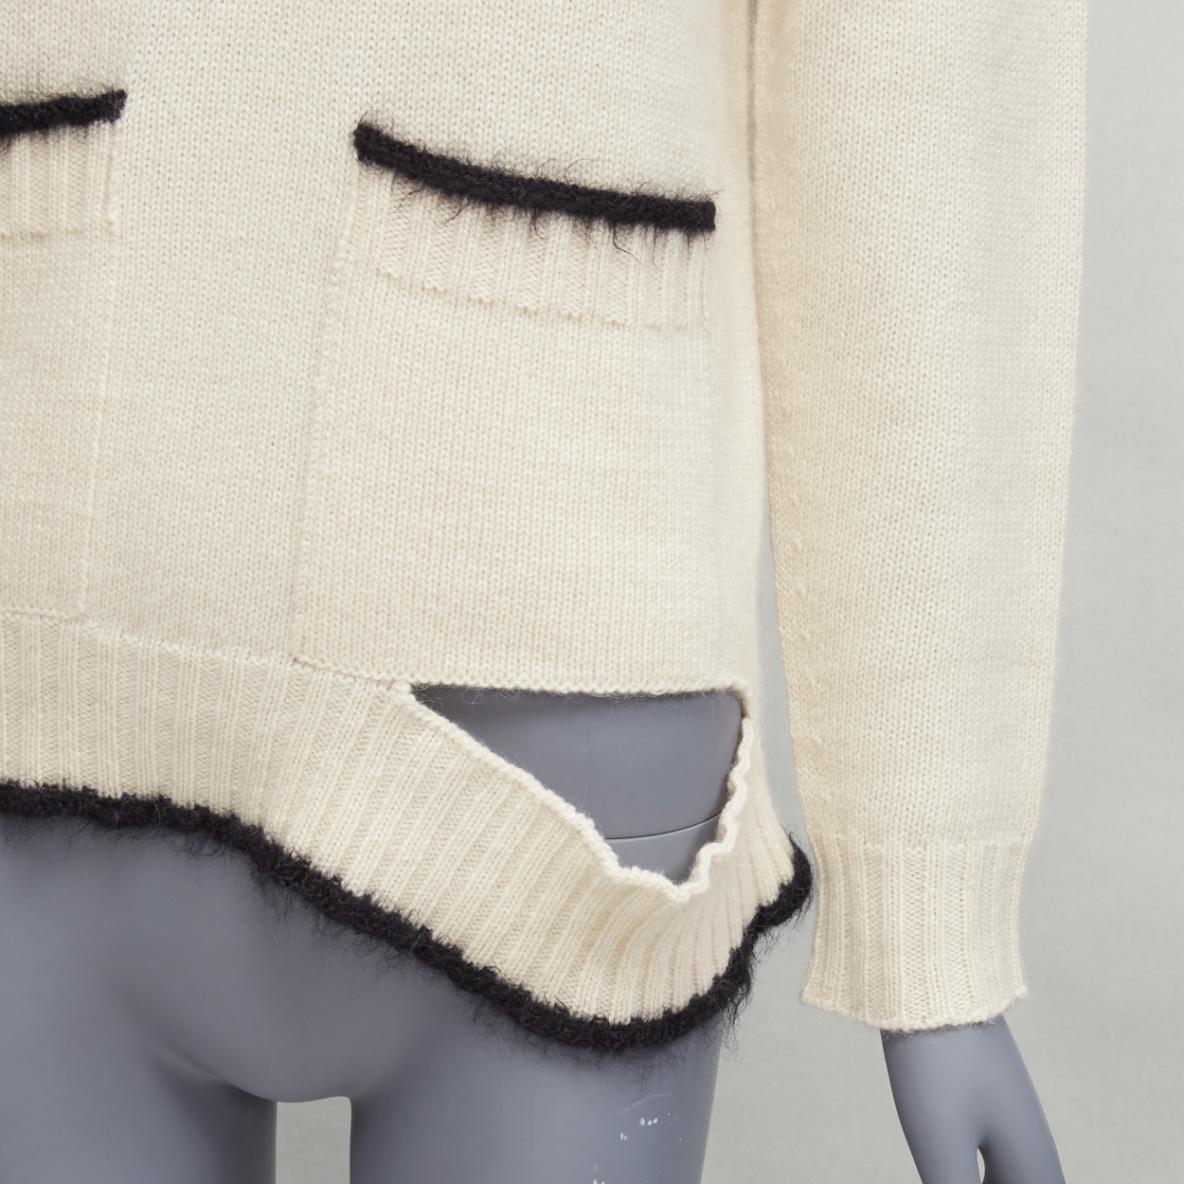 OLD CELINE PHOEBE PHILO cream cashmere mohair detached cutout turtleneck sweater M
Reference: TGAS/D00387
Brand: Celine
Designer: Phoebe Philo
Material: Cashmere, Mohair
Color: Cream, Black
Pattern: Solid
Closure: Pull On
Made in: